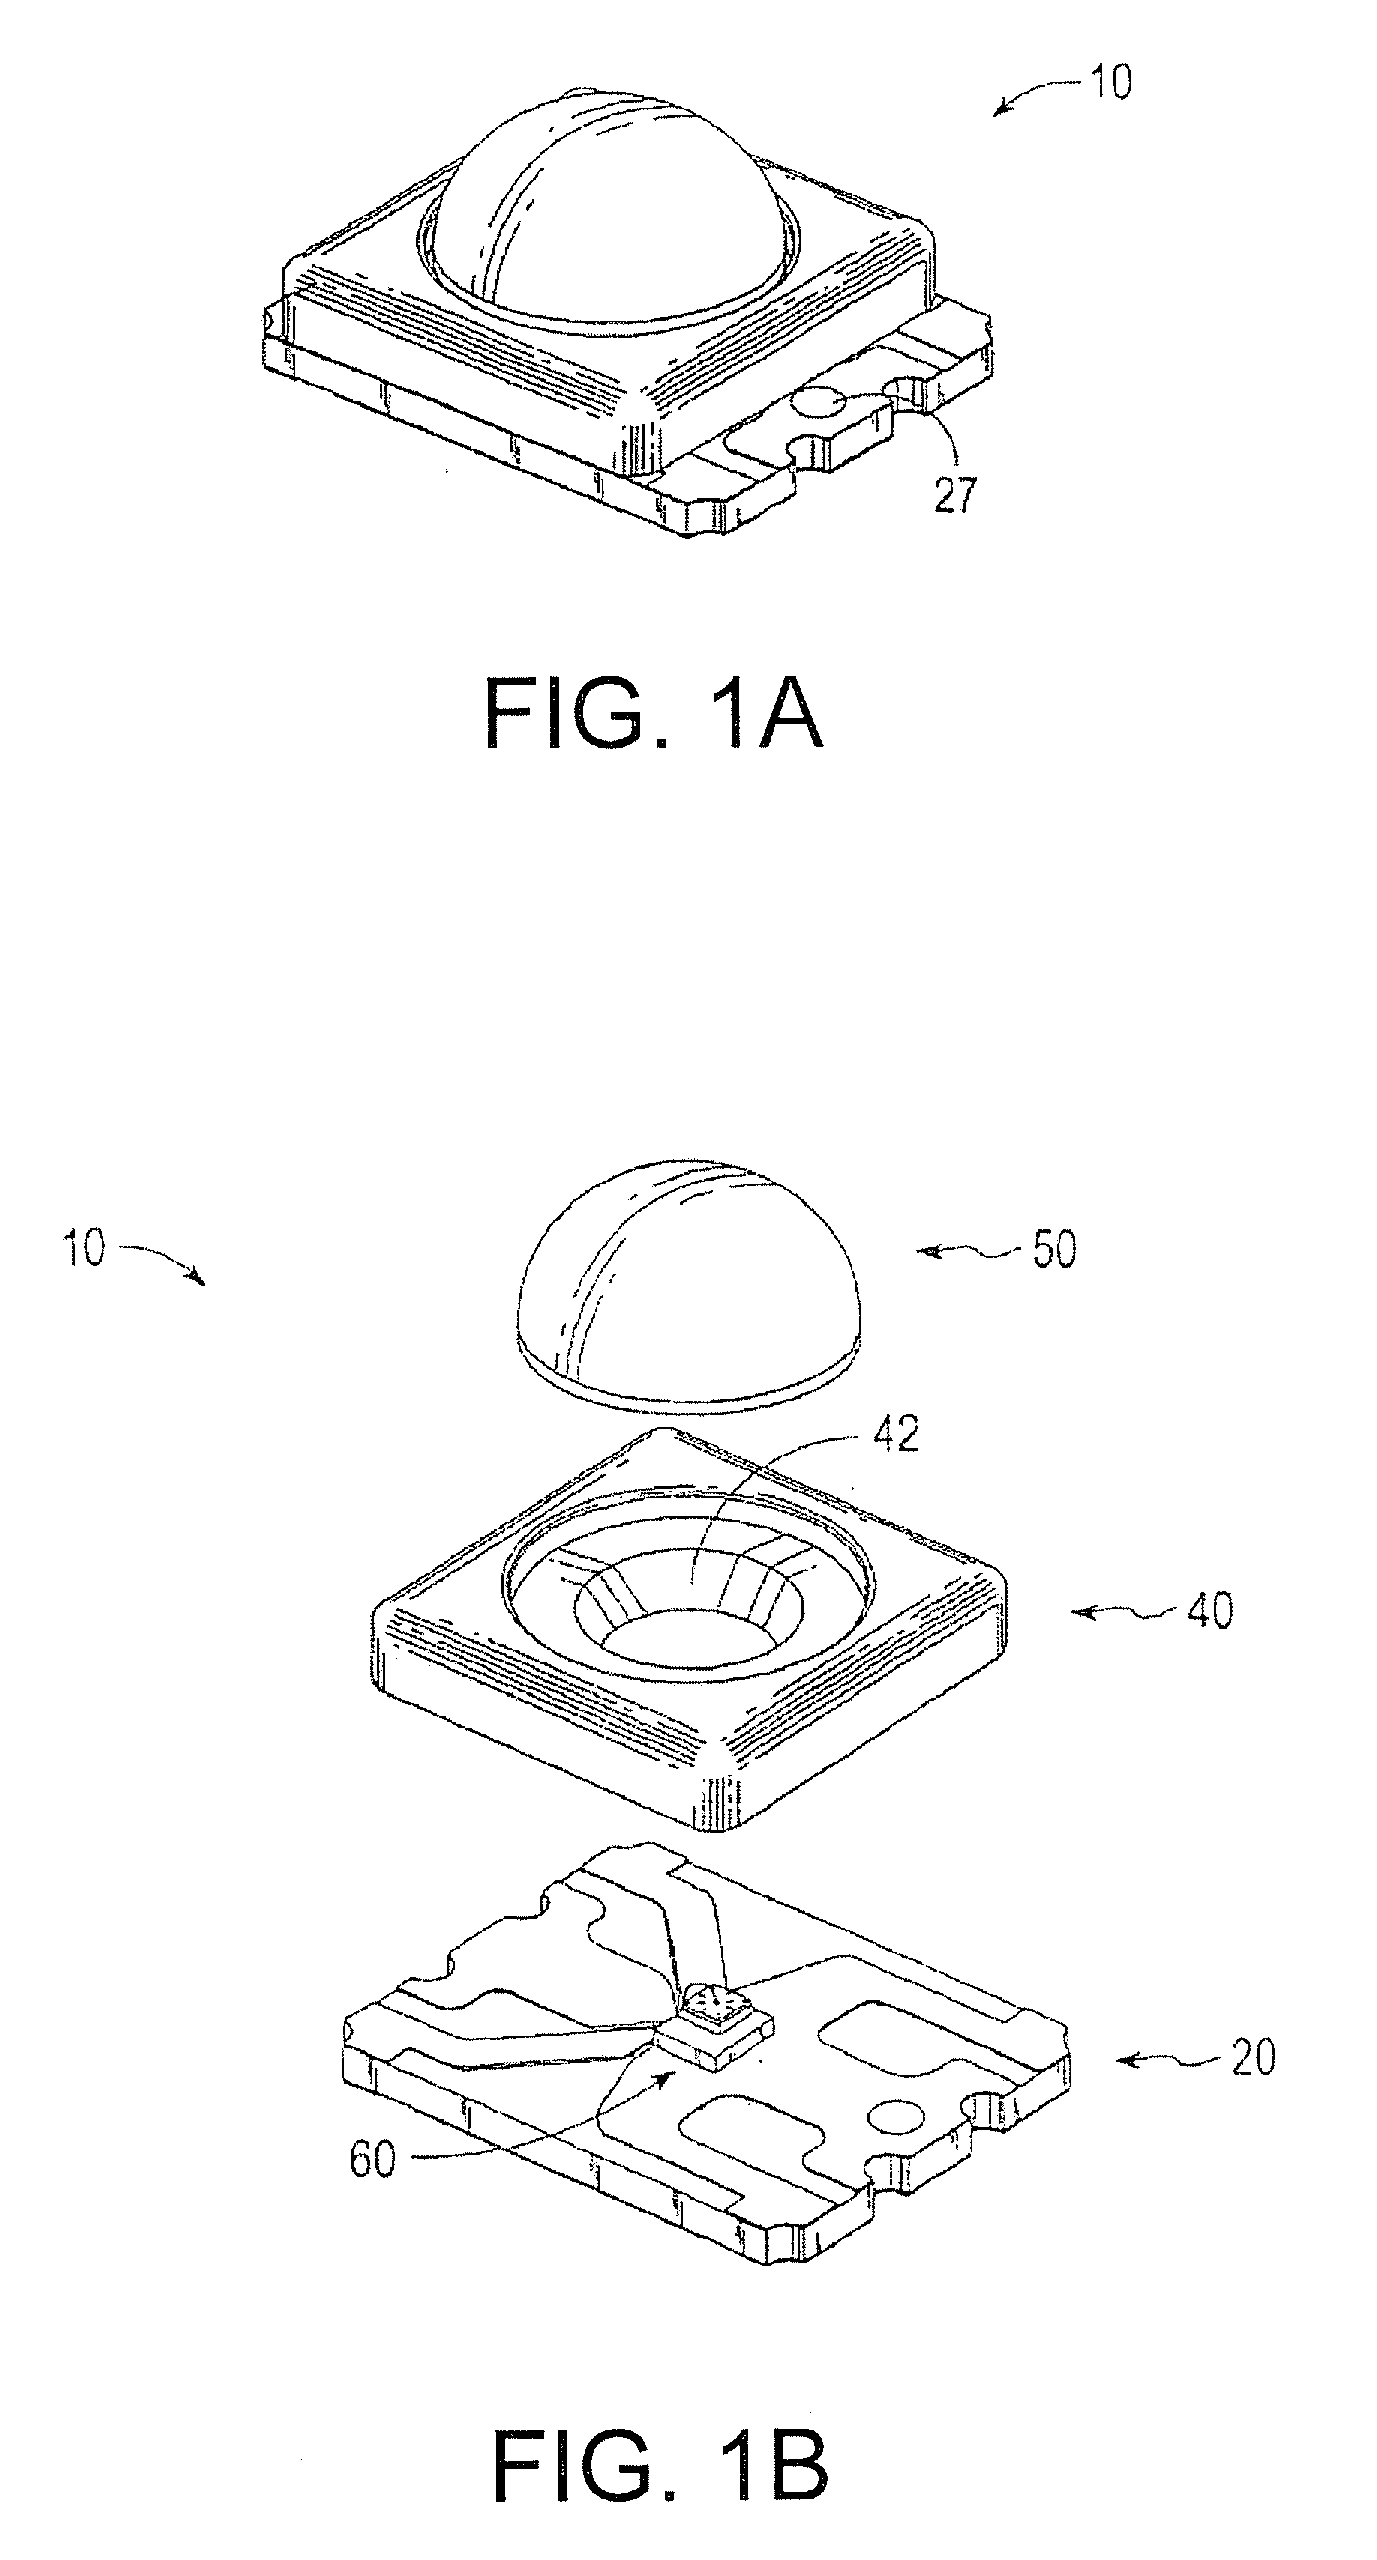 Methods of assembly for a semiconductor light emitting device package